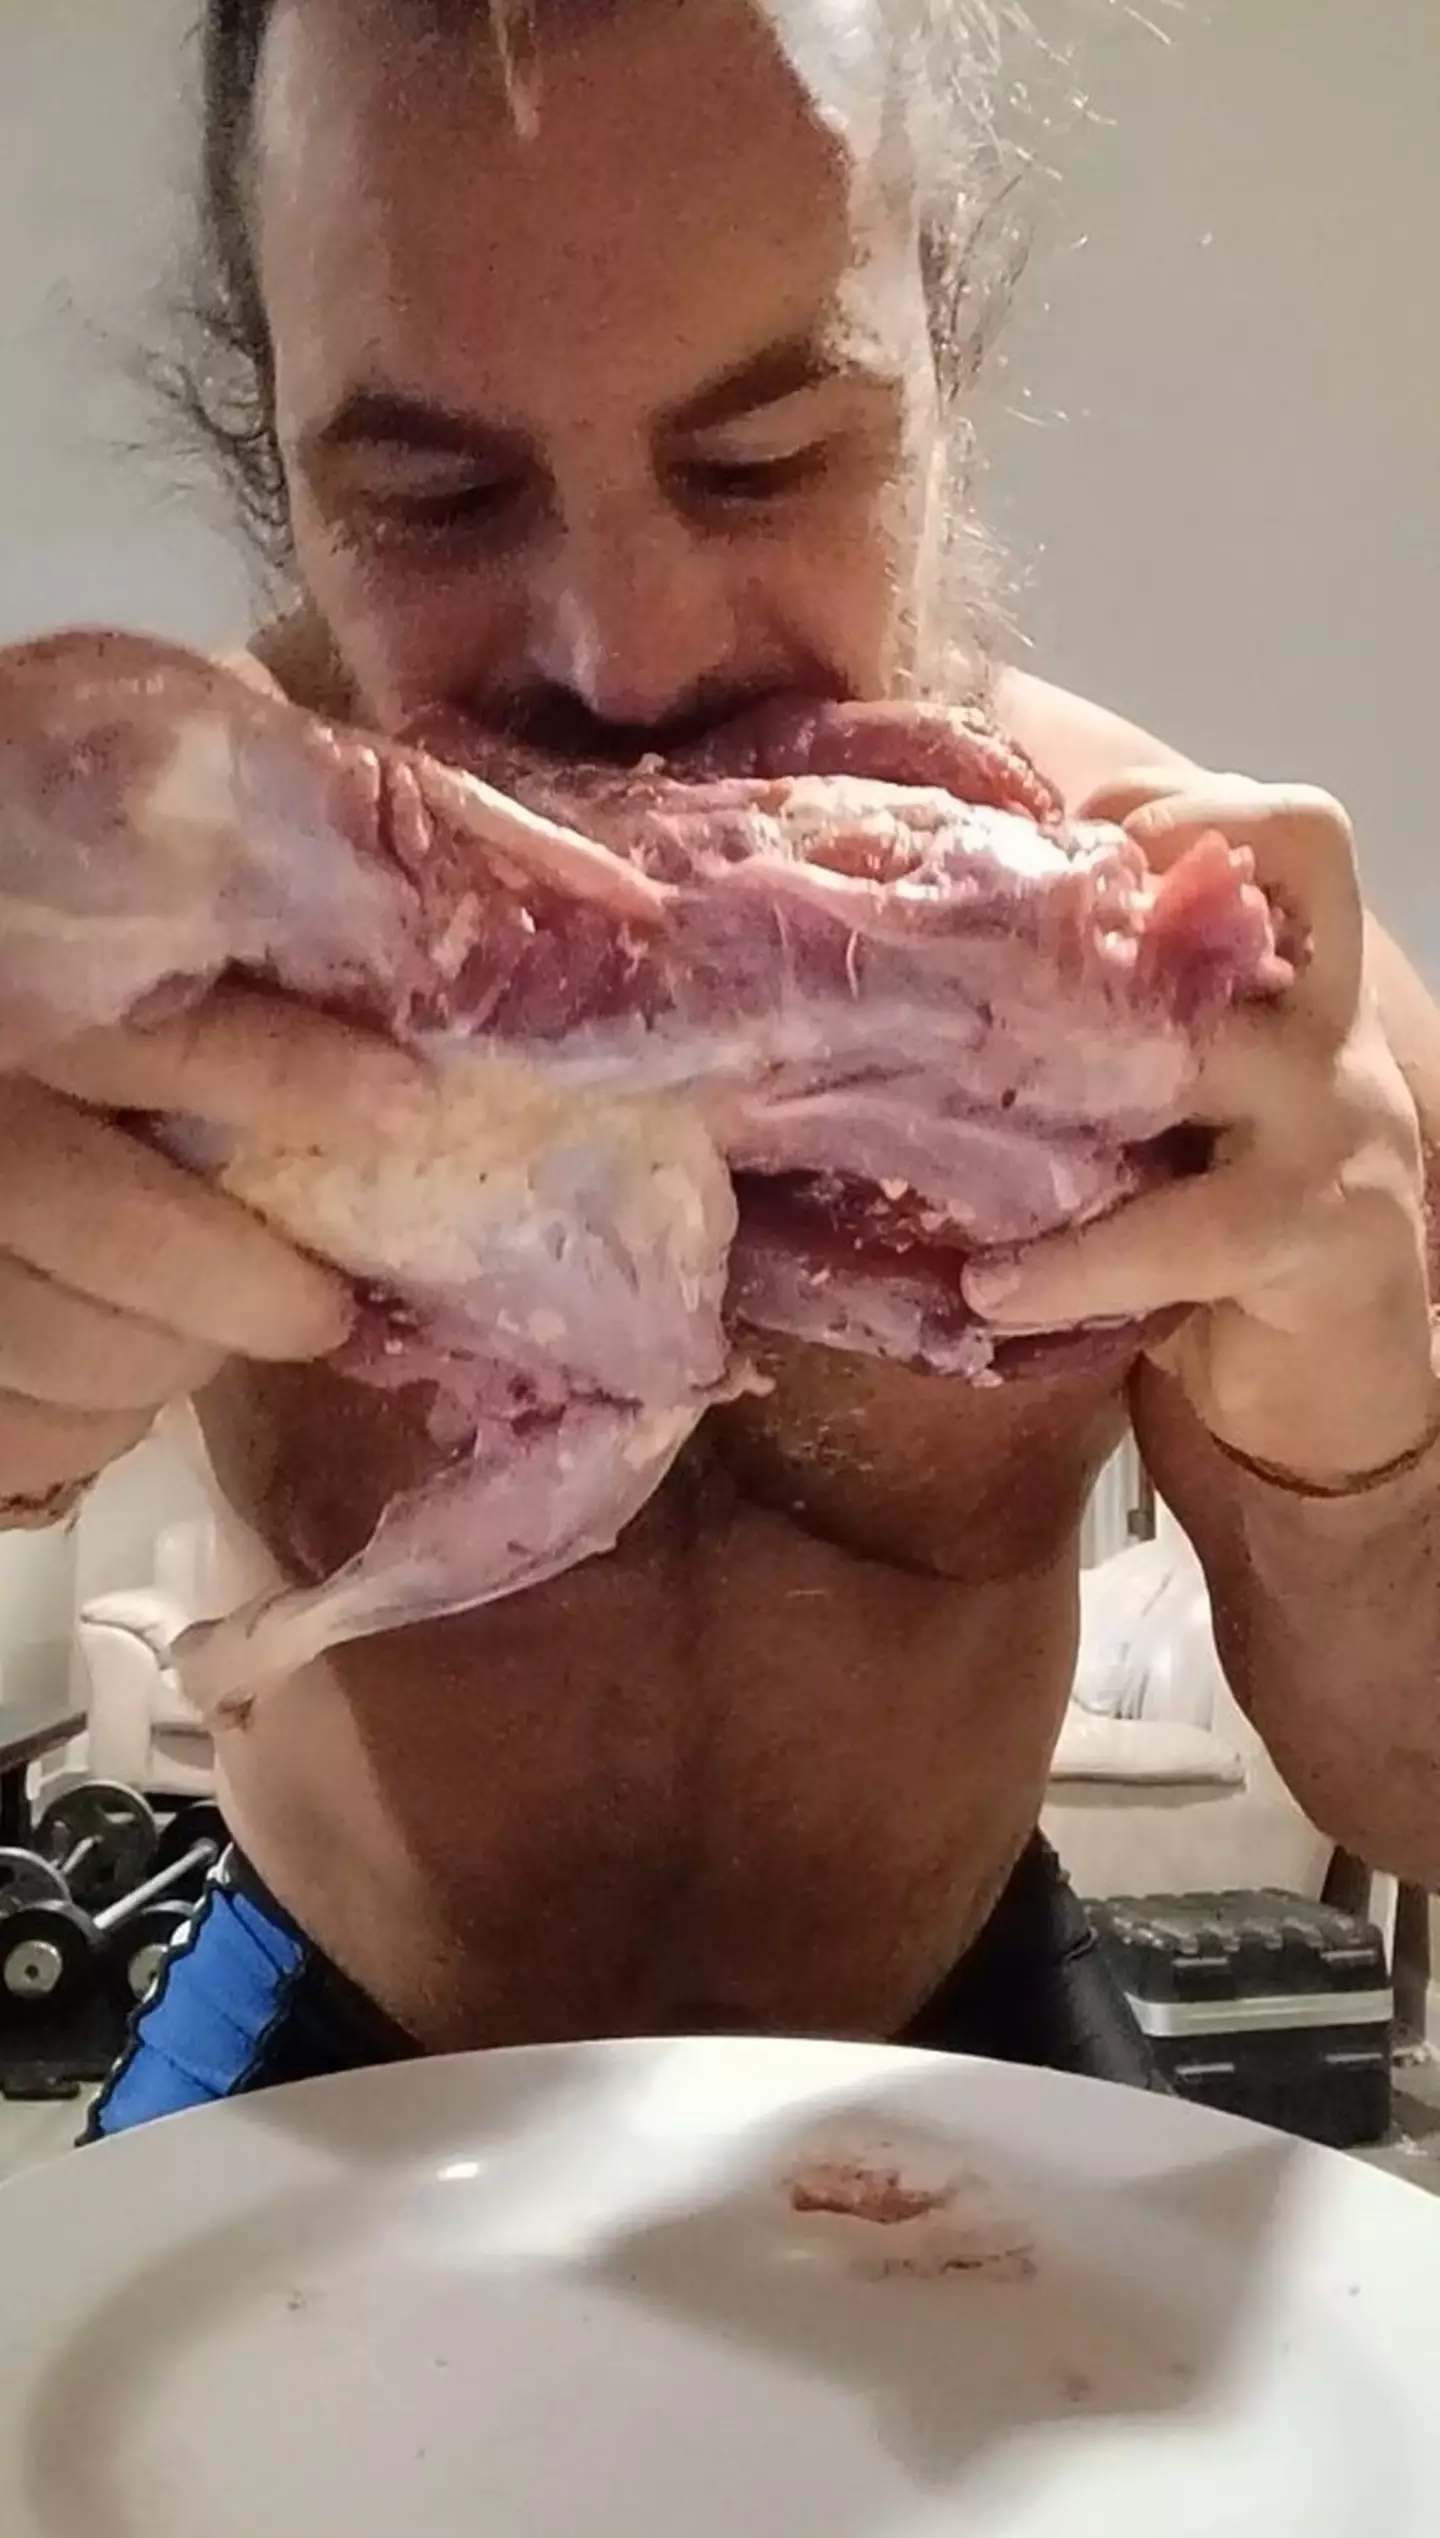 Boban Simic lives off a diet that consists of raw meat, eggs and breast milk.